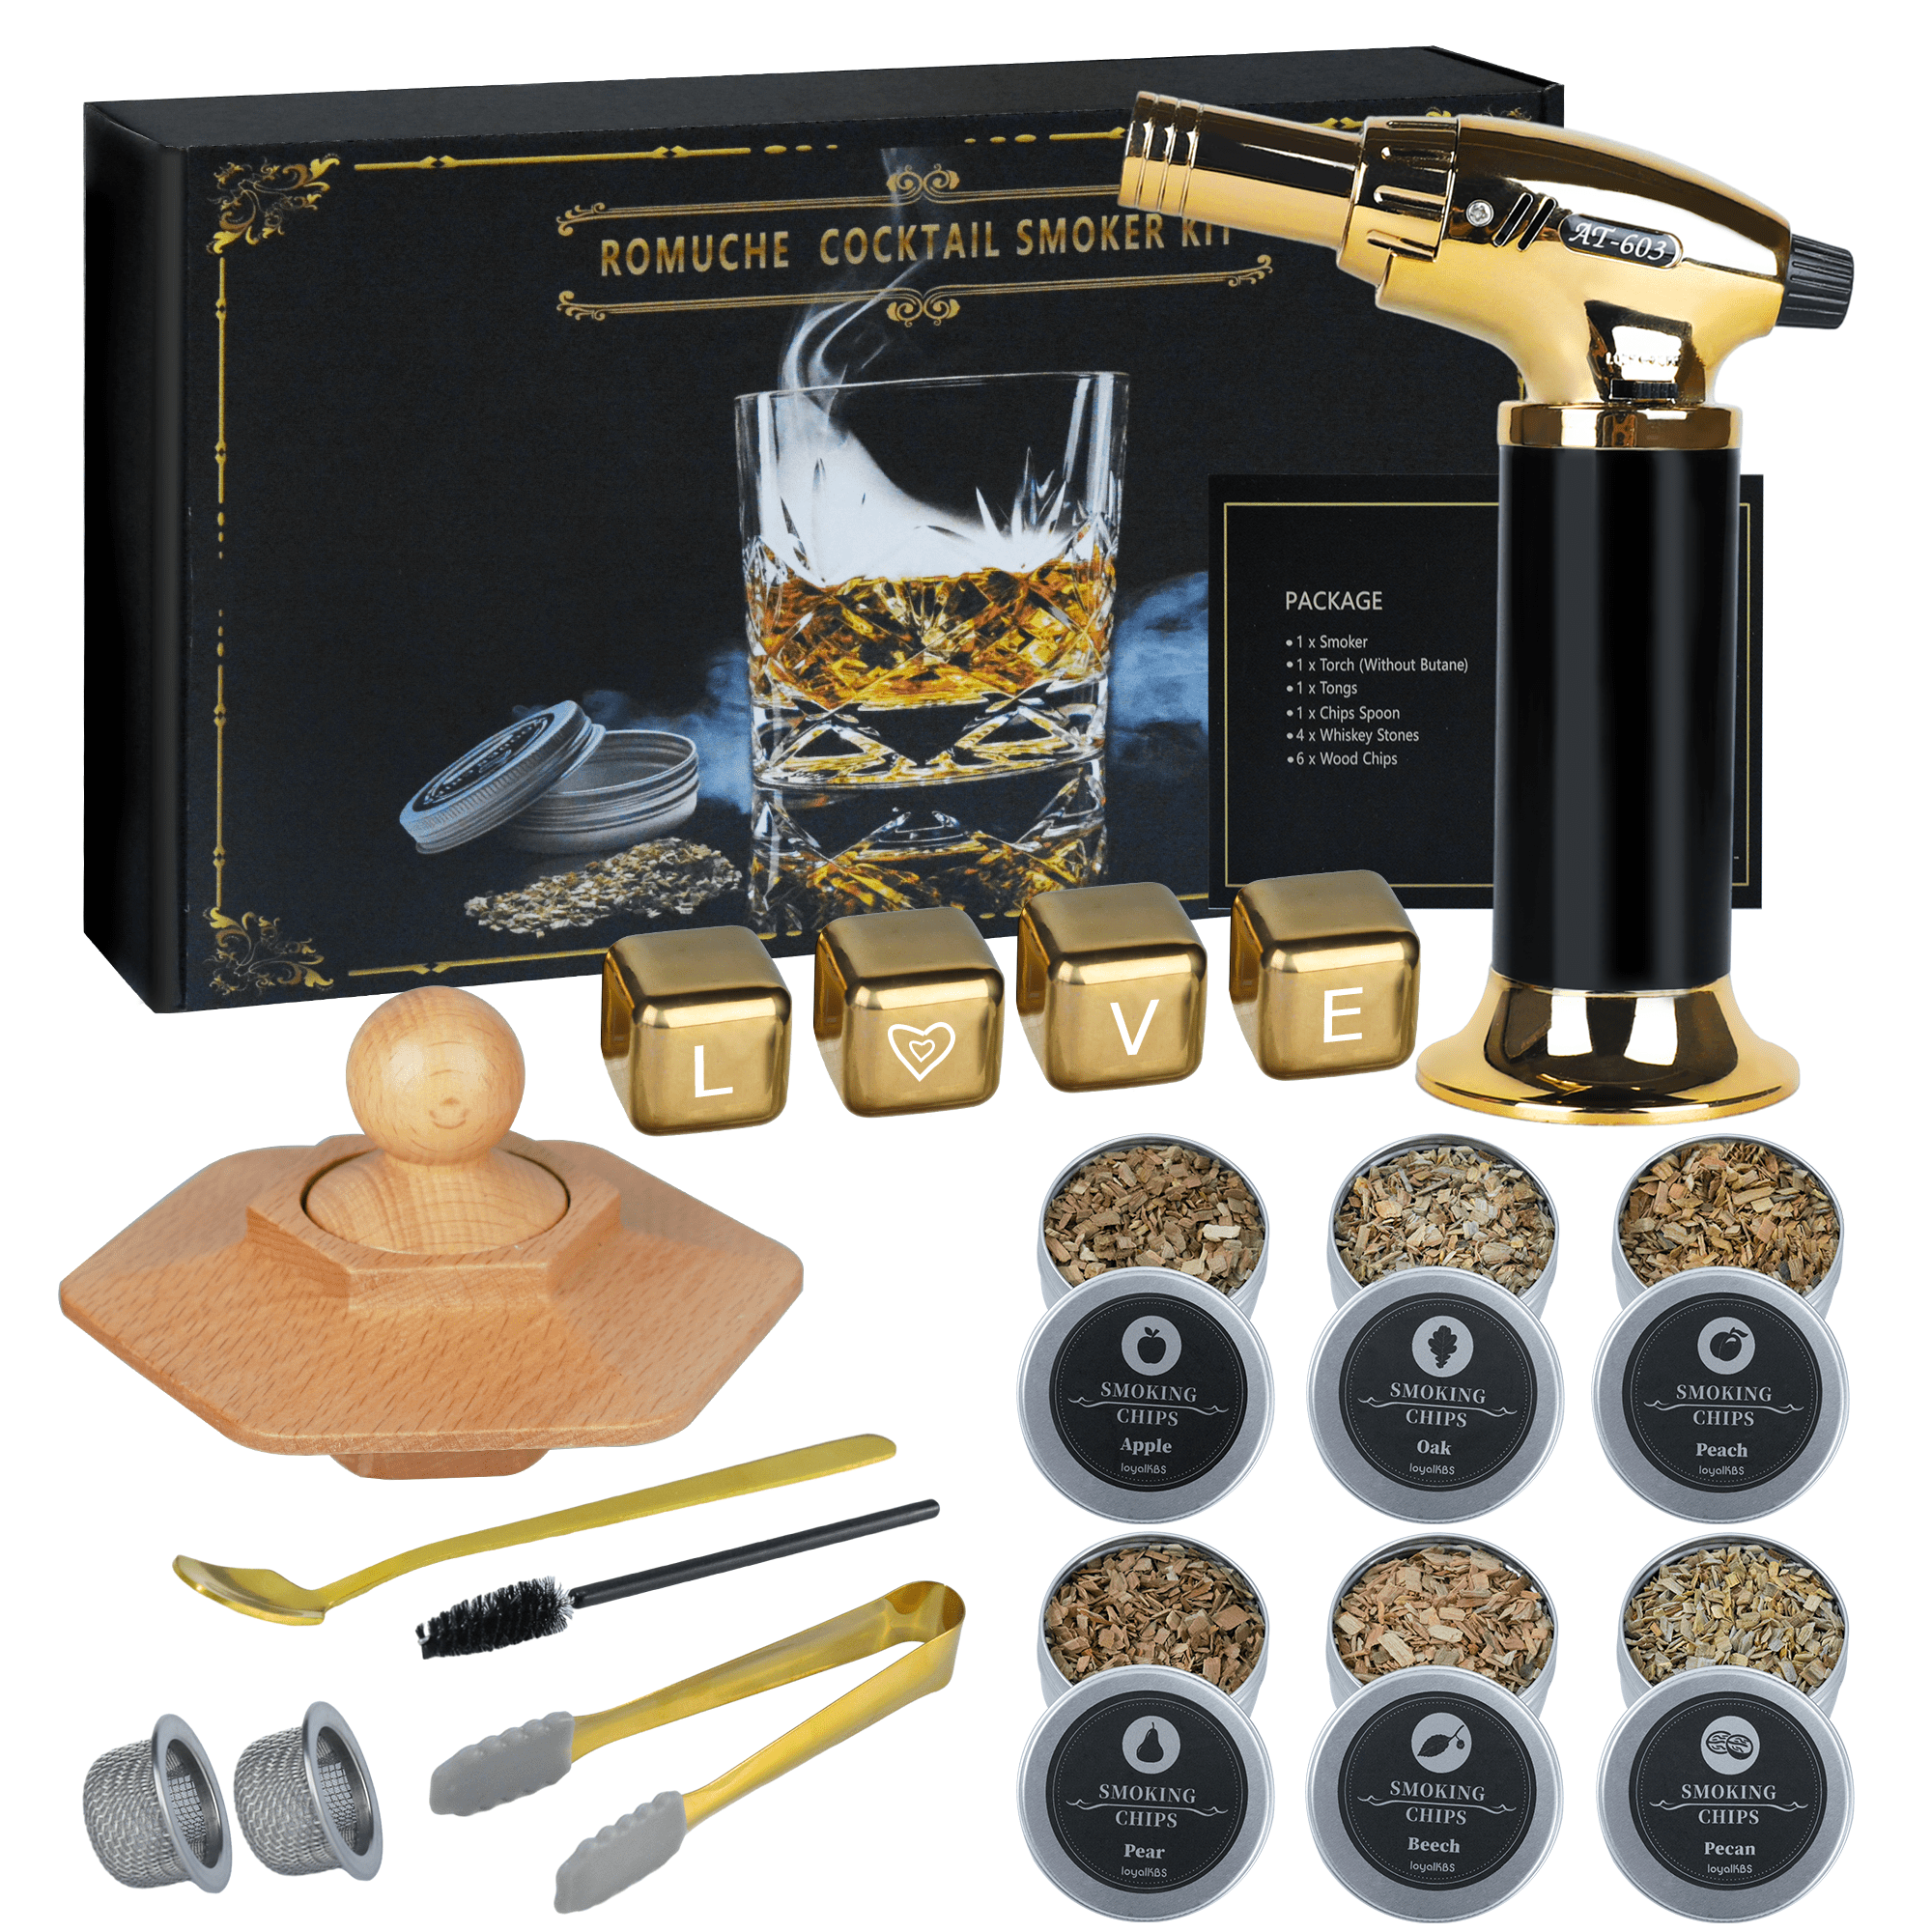 Smoker Kit with Wood Chips and Torch-Old Fashioned Chimney Smoke Top Drink  Infuser for Cocktails, Whiskey, Rum, Gin & Bourbon for